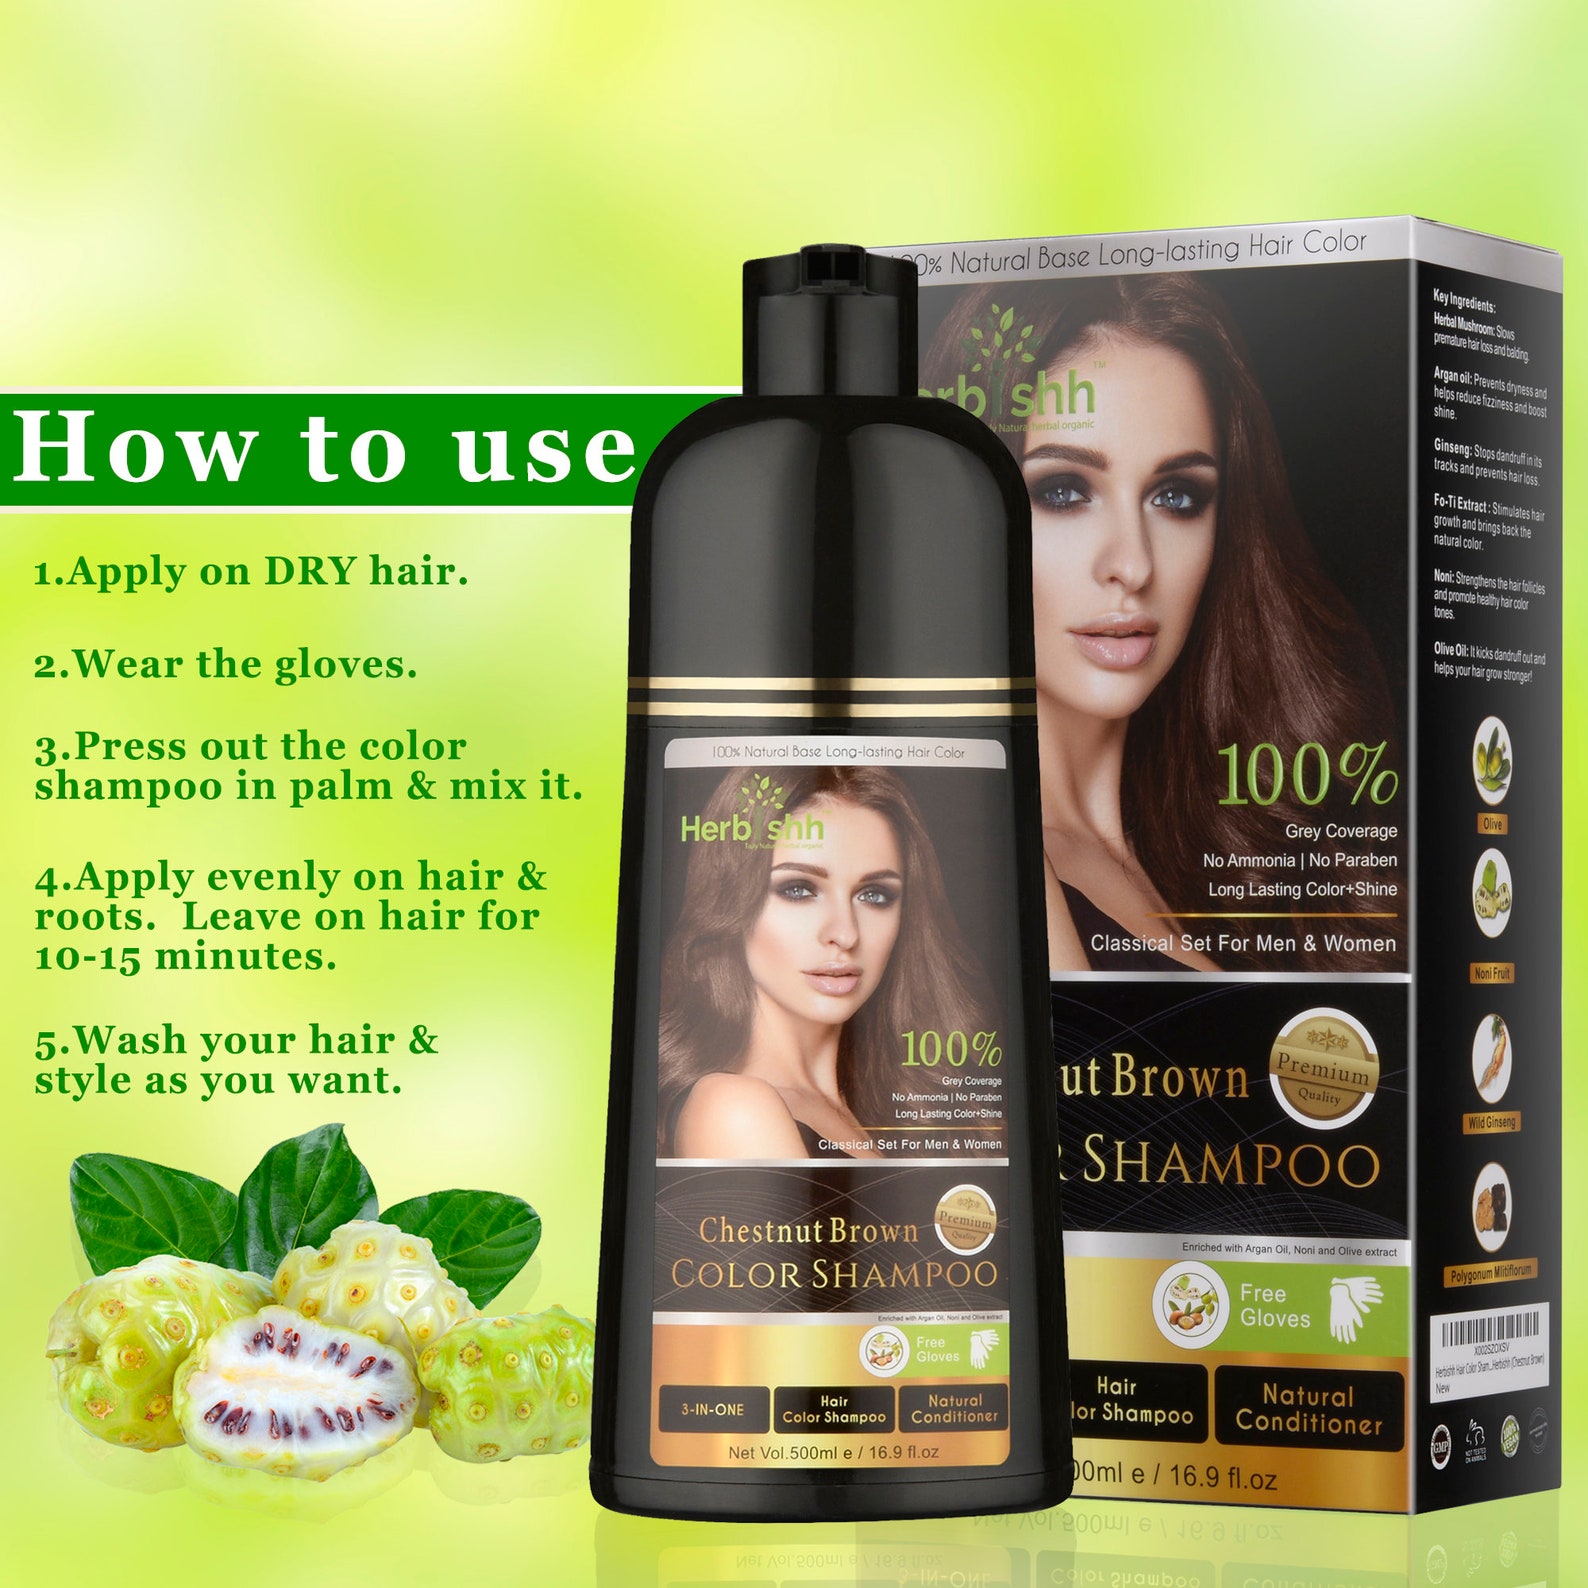 Buy 1pc Herbishh chestnut Brown Hair Color Shampoo for Gray Hair Get ...